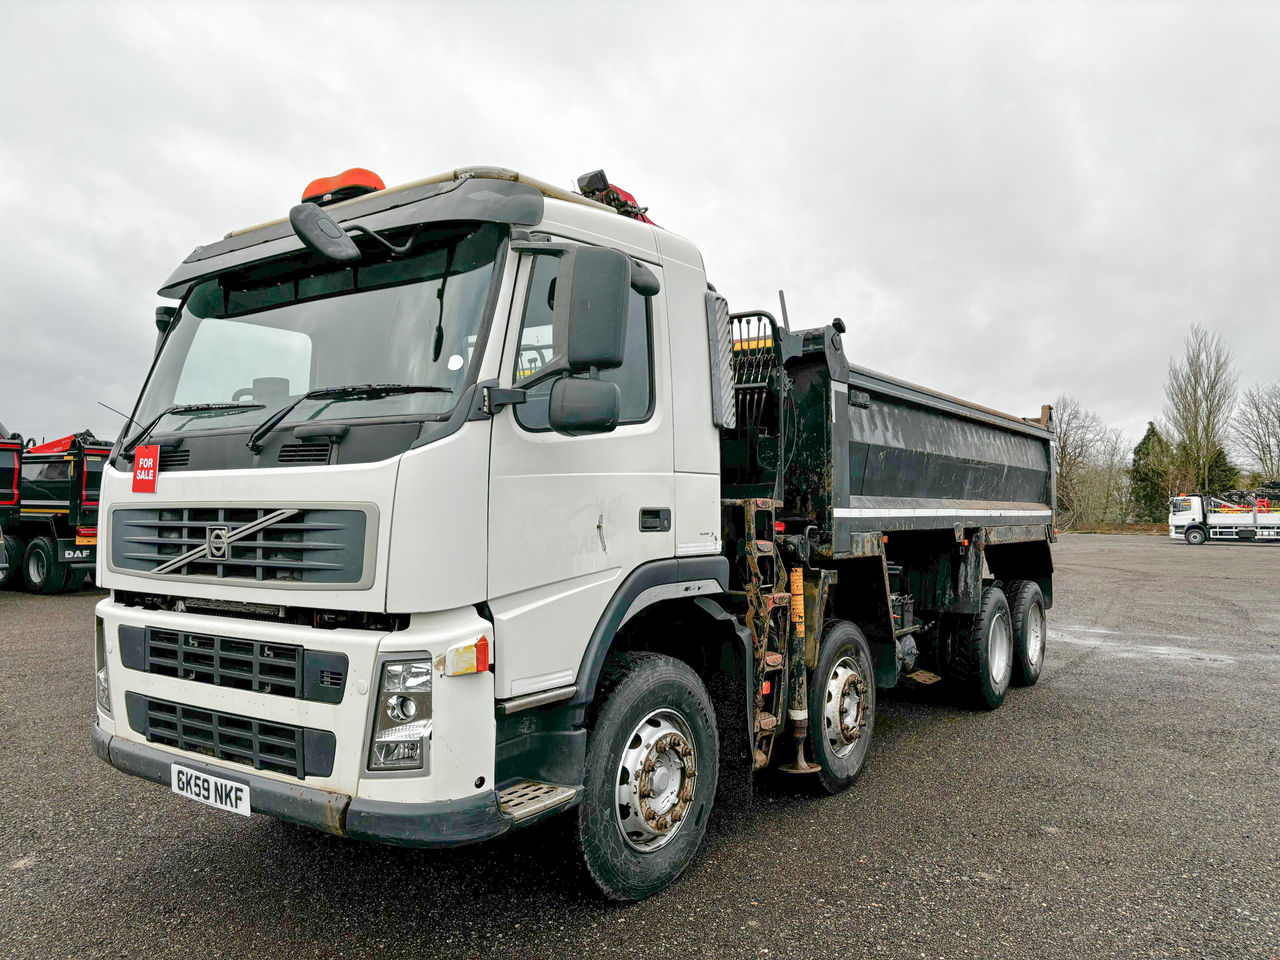 Ready to go Volvo FM 400, Tipper Grab, , 32 Tonne, Day Cab, Automatic, Beacons, On Steel Suspension, Wacker Carrier, Strobe Lights, Manual Tailgate, , Palfinger Epsilon, Epsilon M125L | for sale at MV Commercial, the UKs leading Truck, Trailers and Van supplier. (GK59NKF 113241)